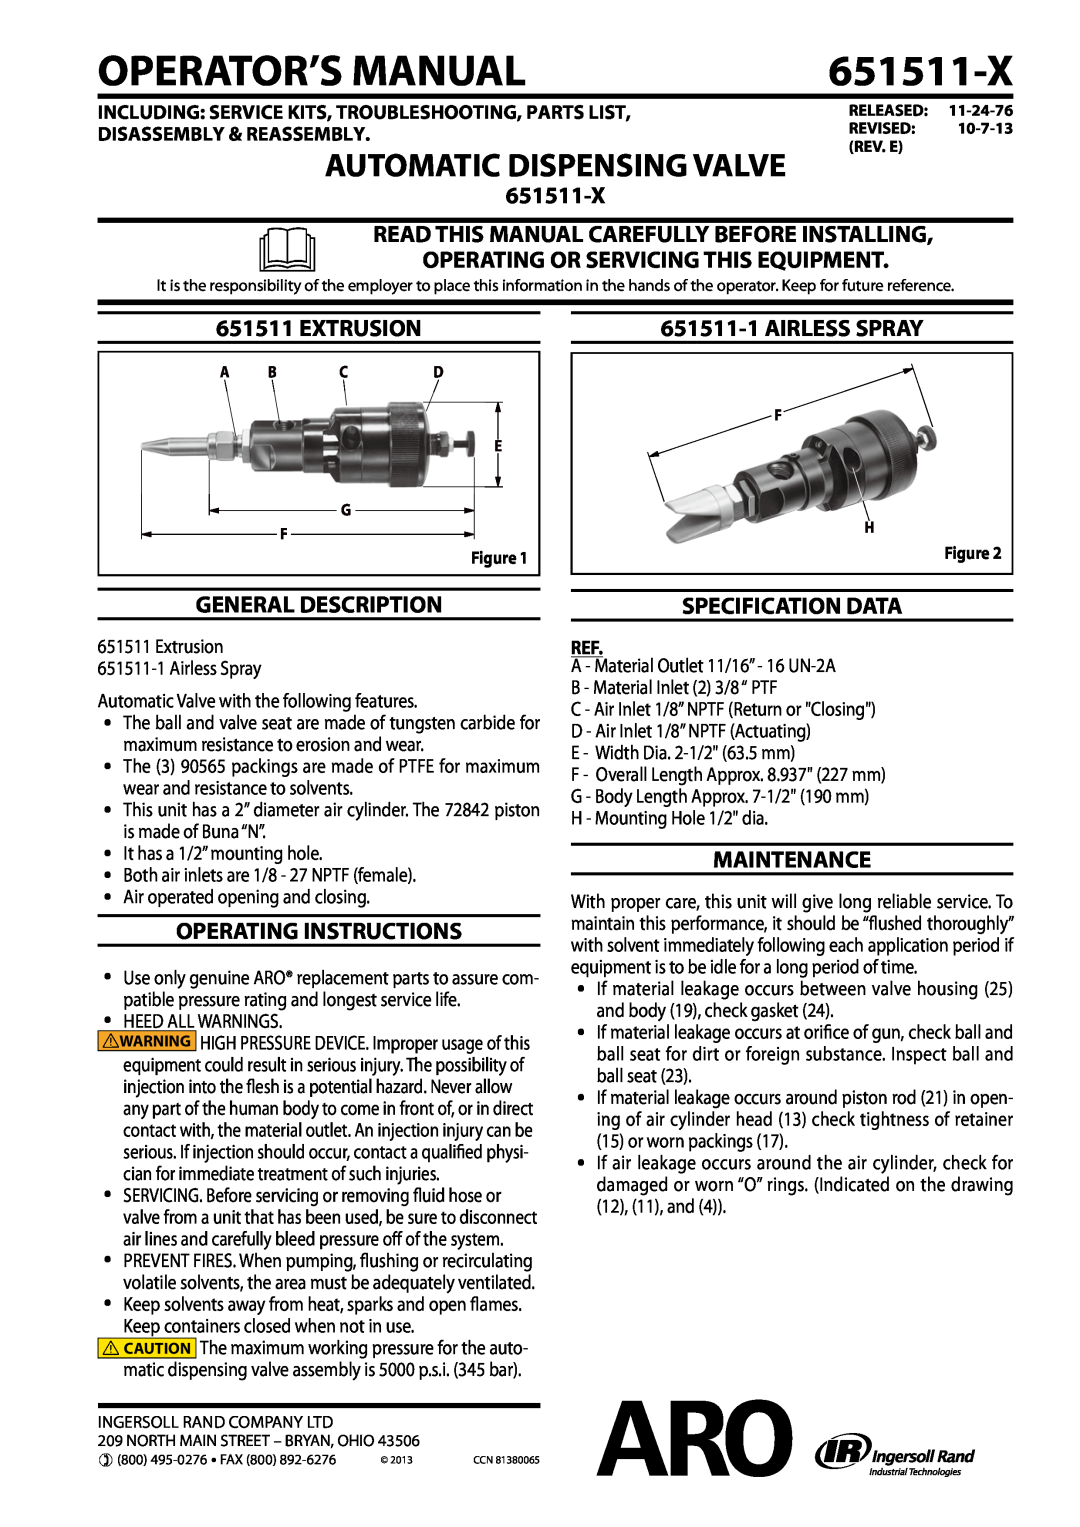 Ingersoll-Rand 651511-X operating instructions Read This Manual Carefully Before Installing, Extrusion, Airless Spray 